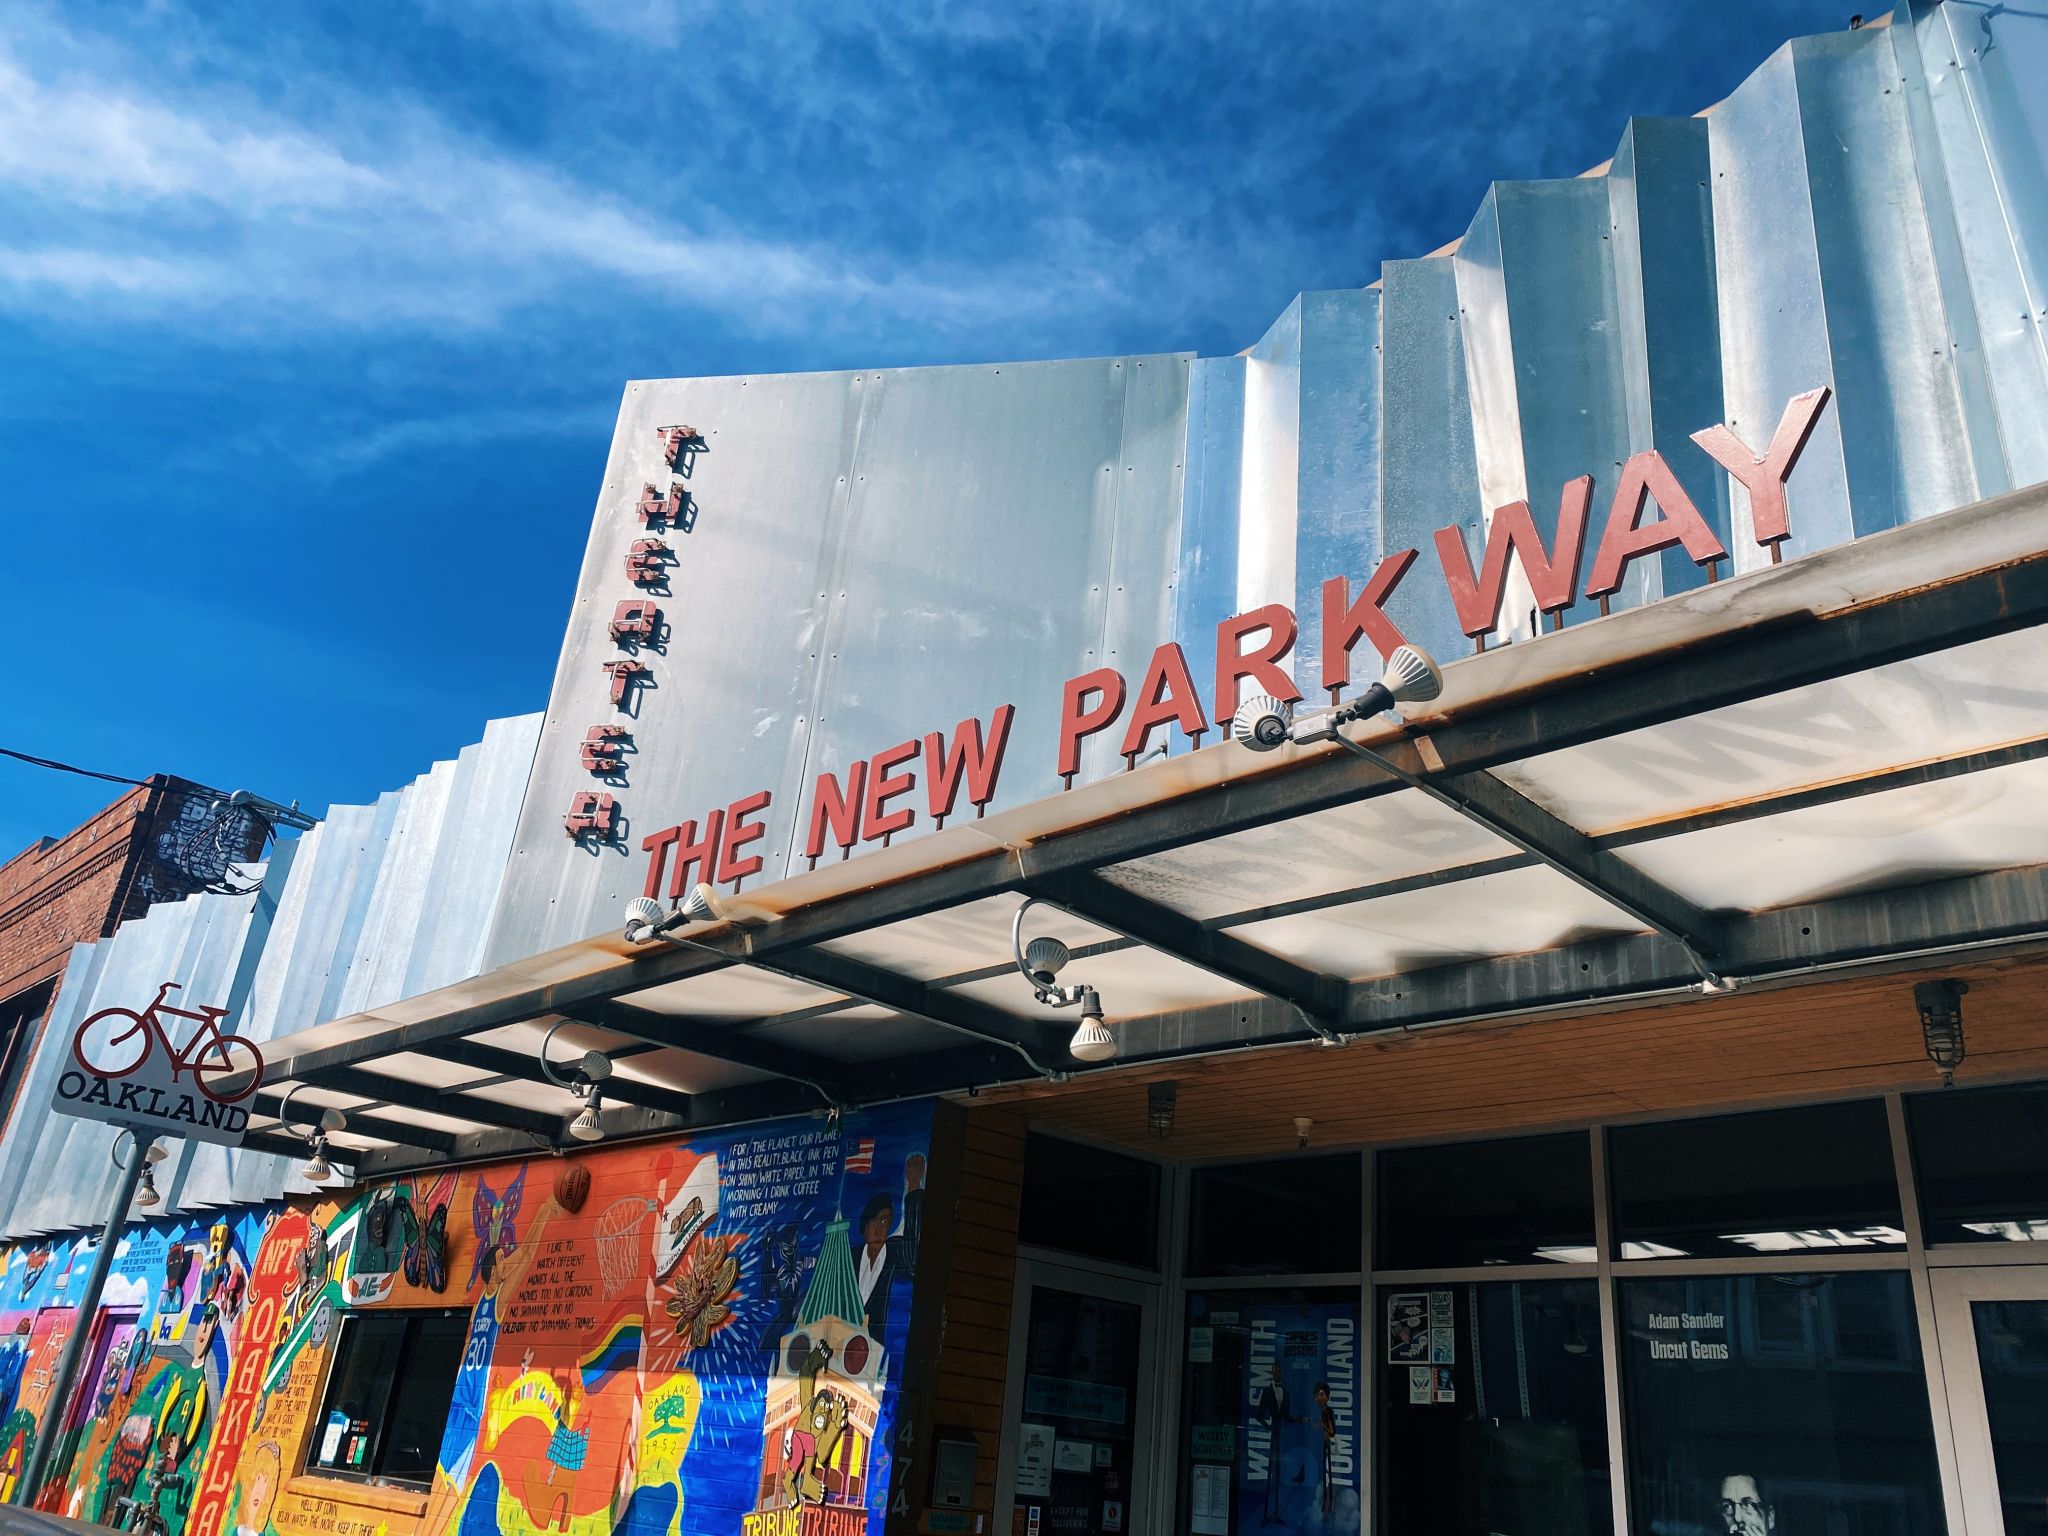 From movies to meal delivery: The New Parkway pivots to survive in a ...